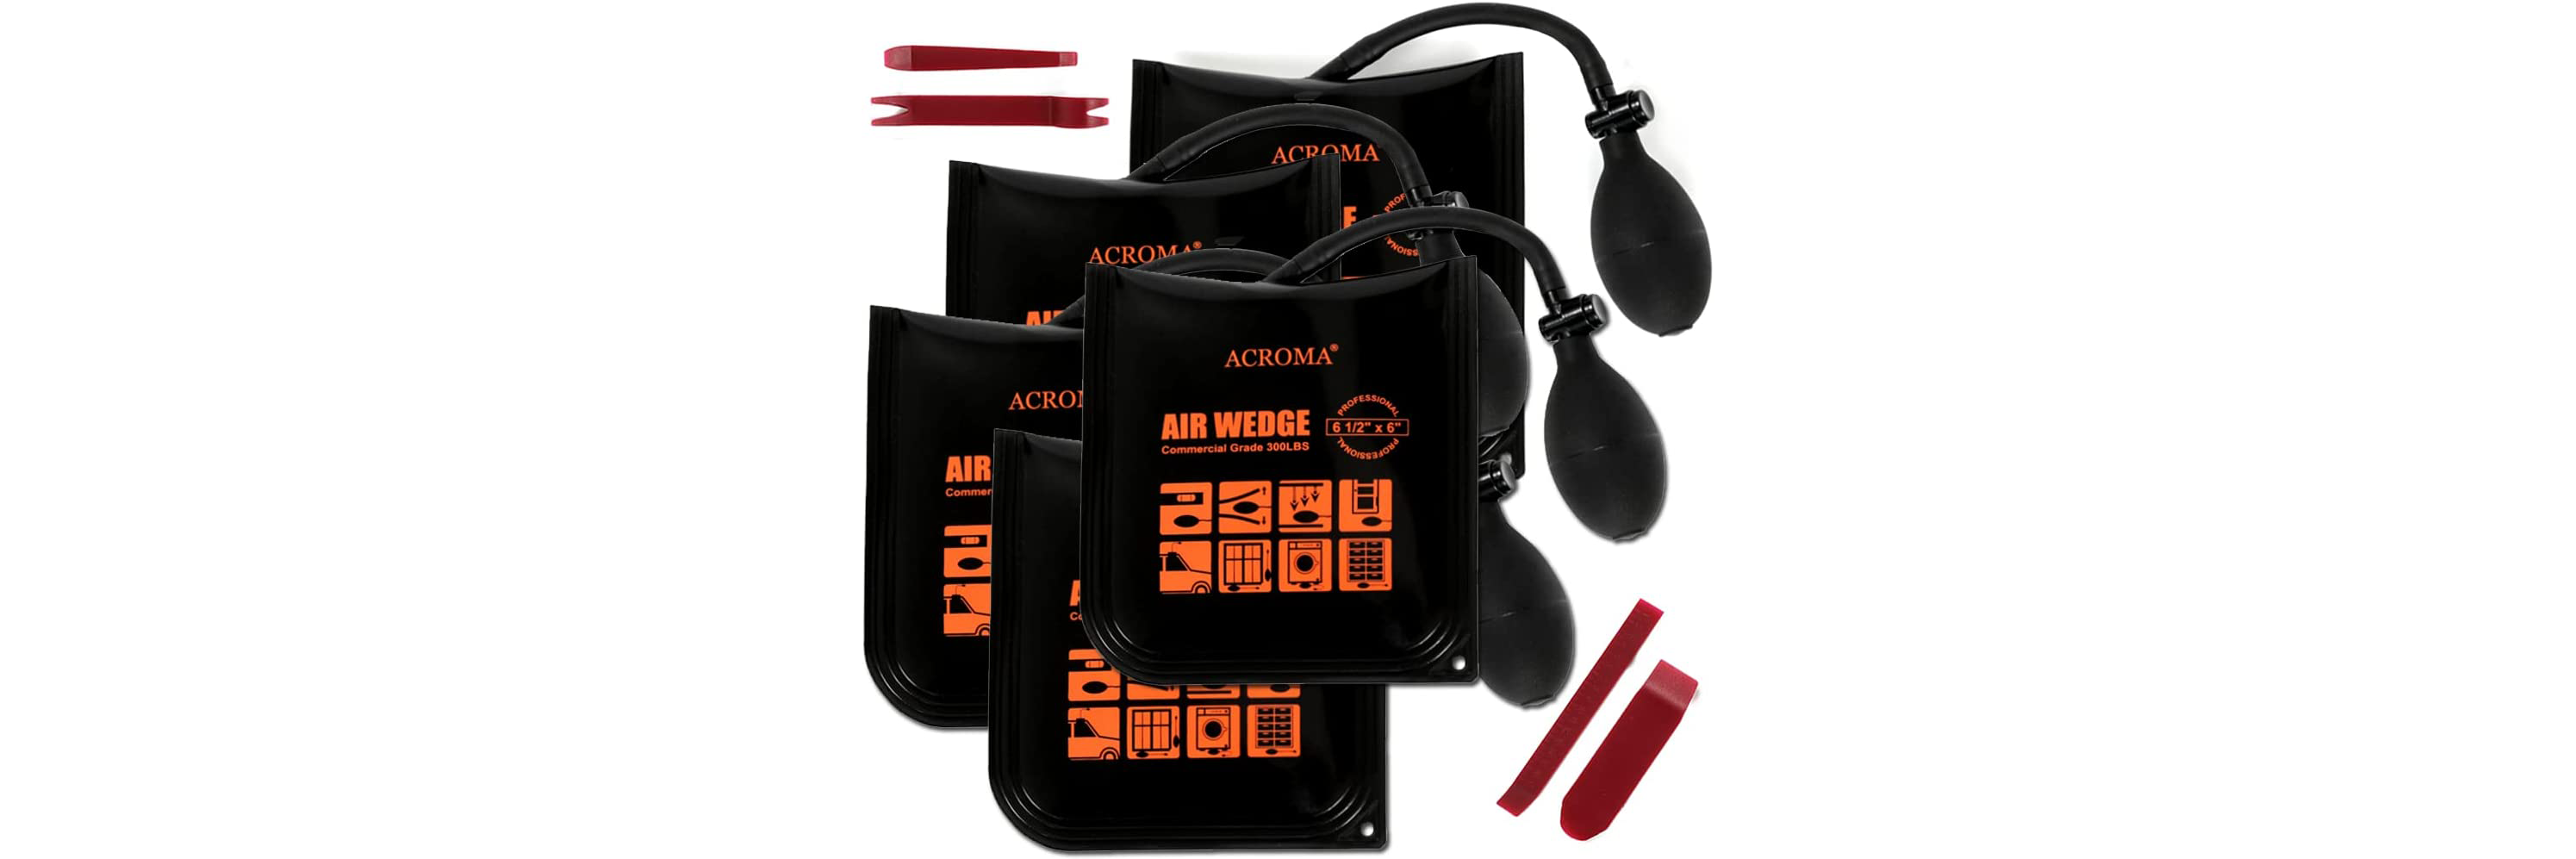 Acroma 5-Pack 6-1/2” x 6” Commercial Grade Air Wedge, Inflatable Shim Bag,  with 300LB Load Rate, Squeeze pump-up/Quick-release, extra 4-Piece Pry Bar  Included. AW0501 –